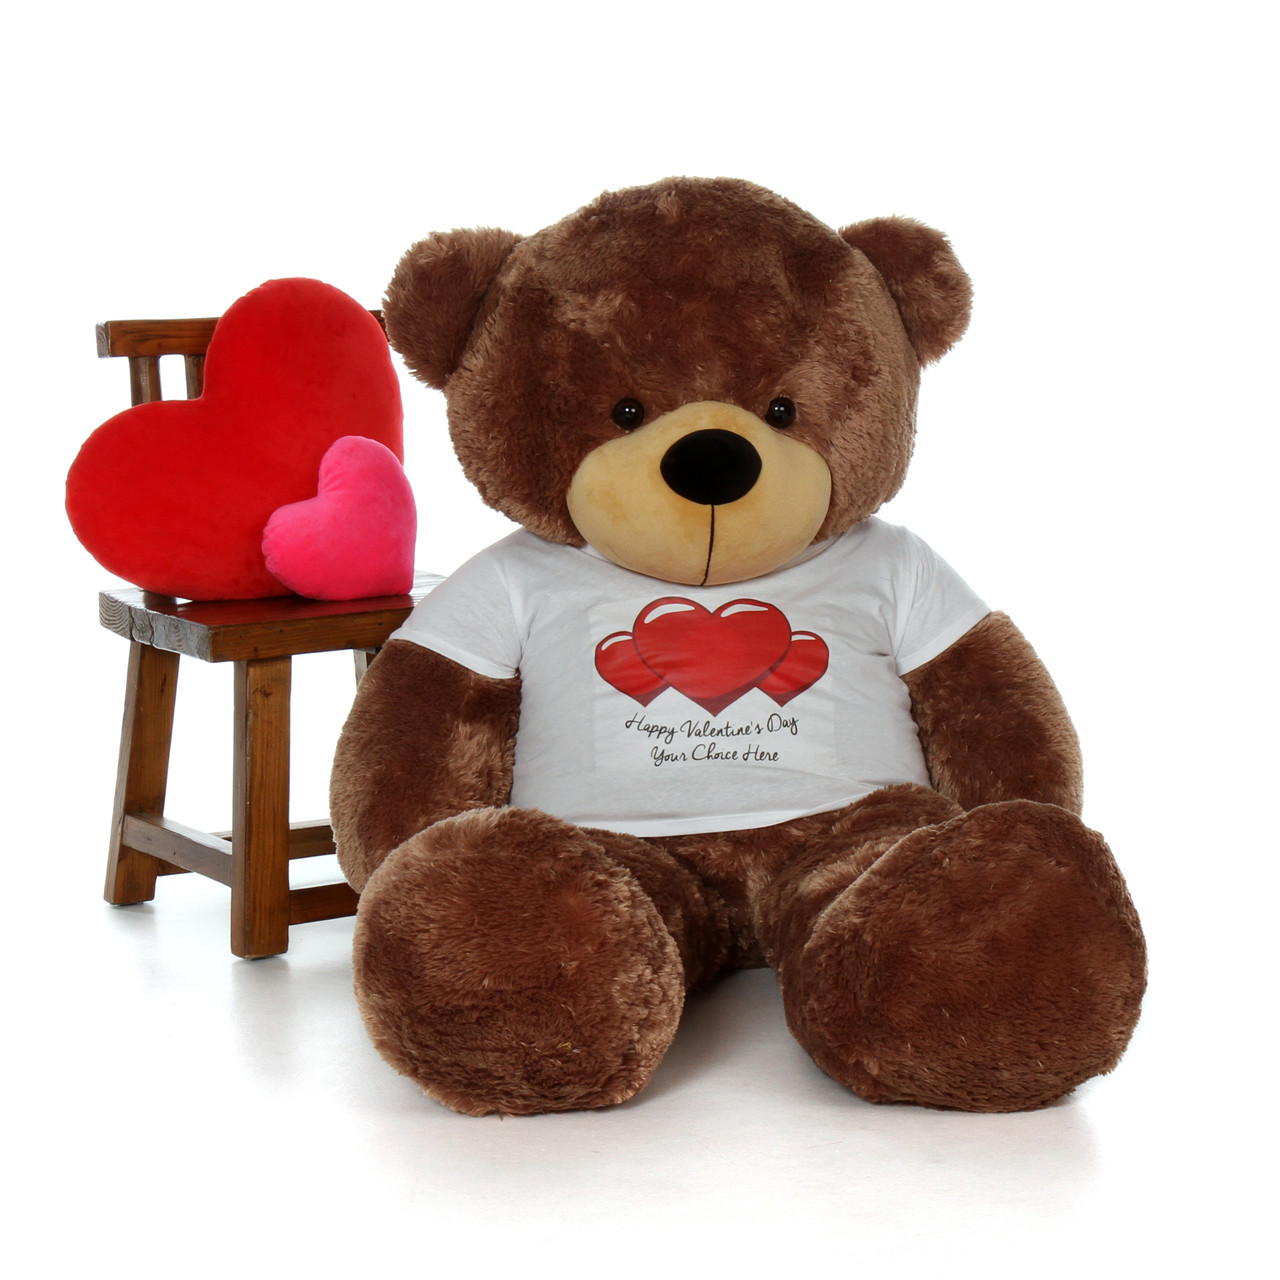 5ft Life Size Teddy Bear wearing customized Happy Valentine’s Day shirt and choose ...1280 x 1280